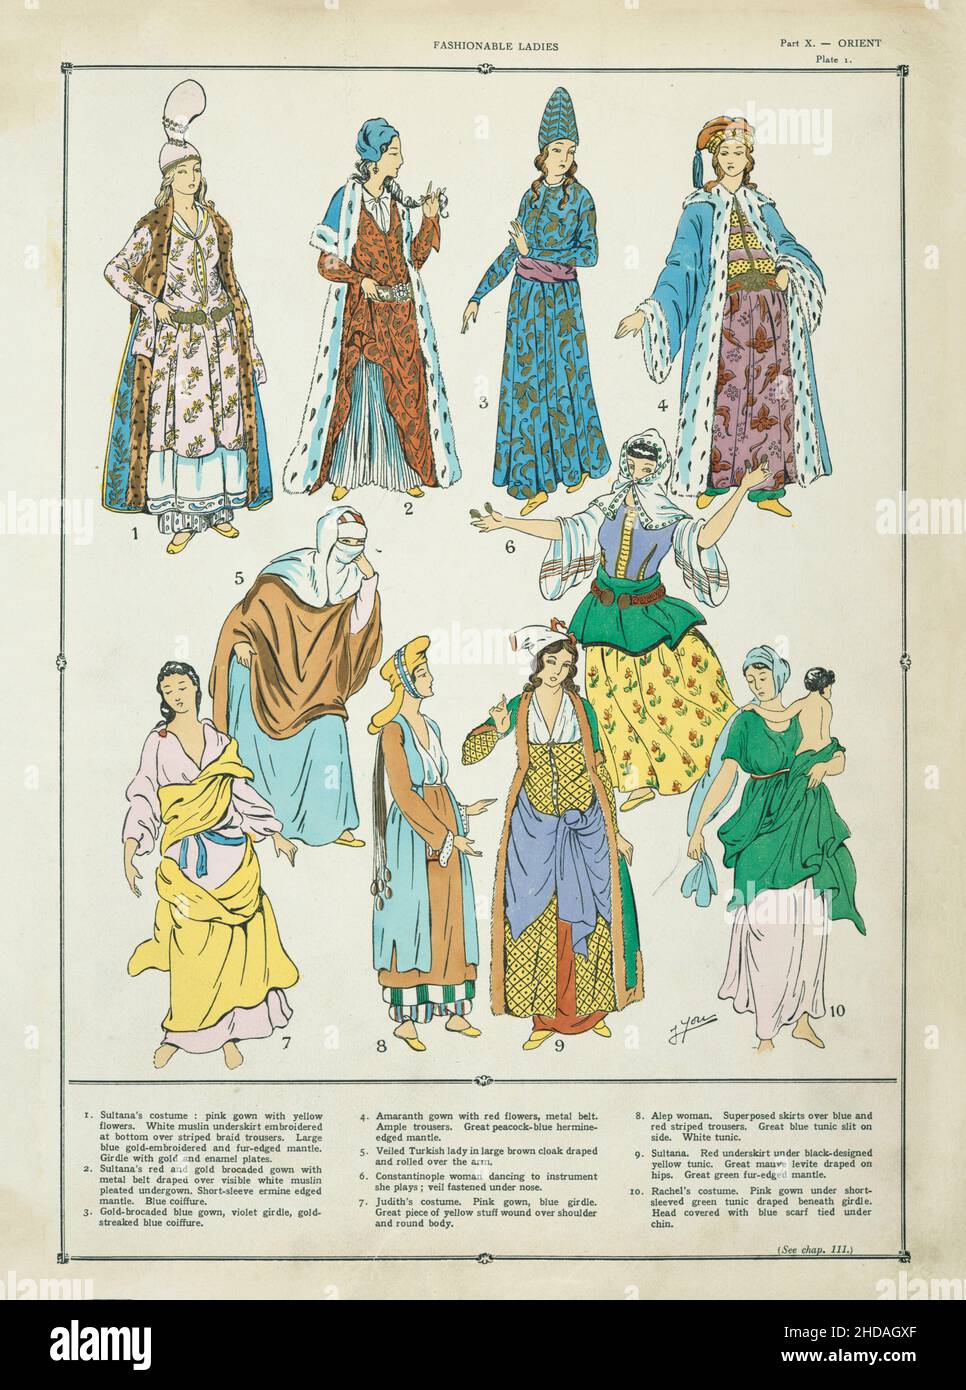 Vintage illustration of Turkish fashionable ladies. 1926-1927 Sultana's costume: white muslin underskirt embroidered at bottom. Large blue gold-embroi Stock Photo